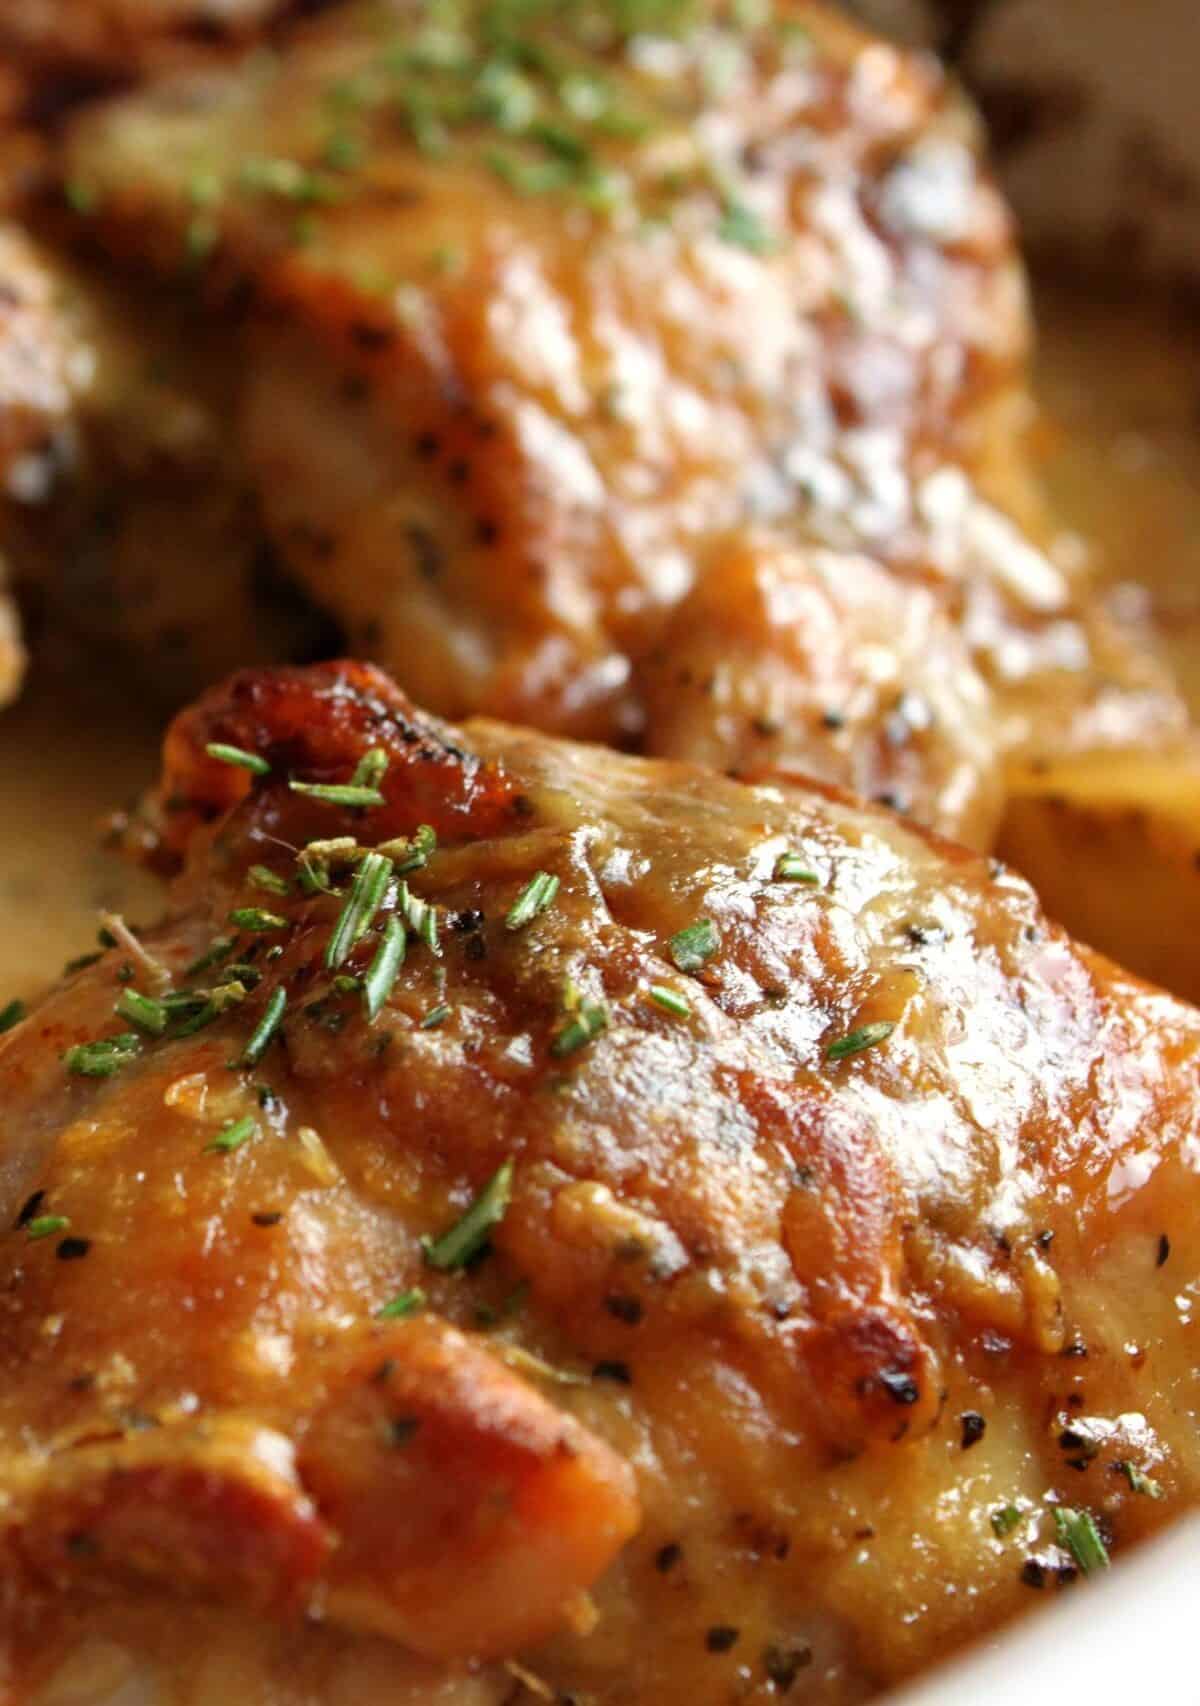  Perfectly cooked chicken bursting with juicy flavors